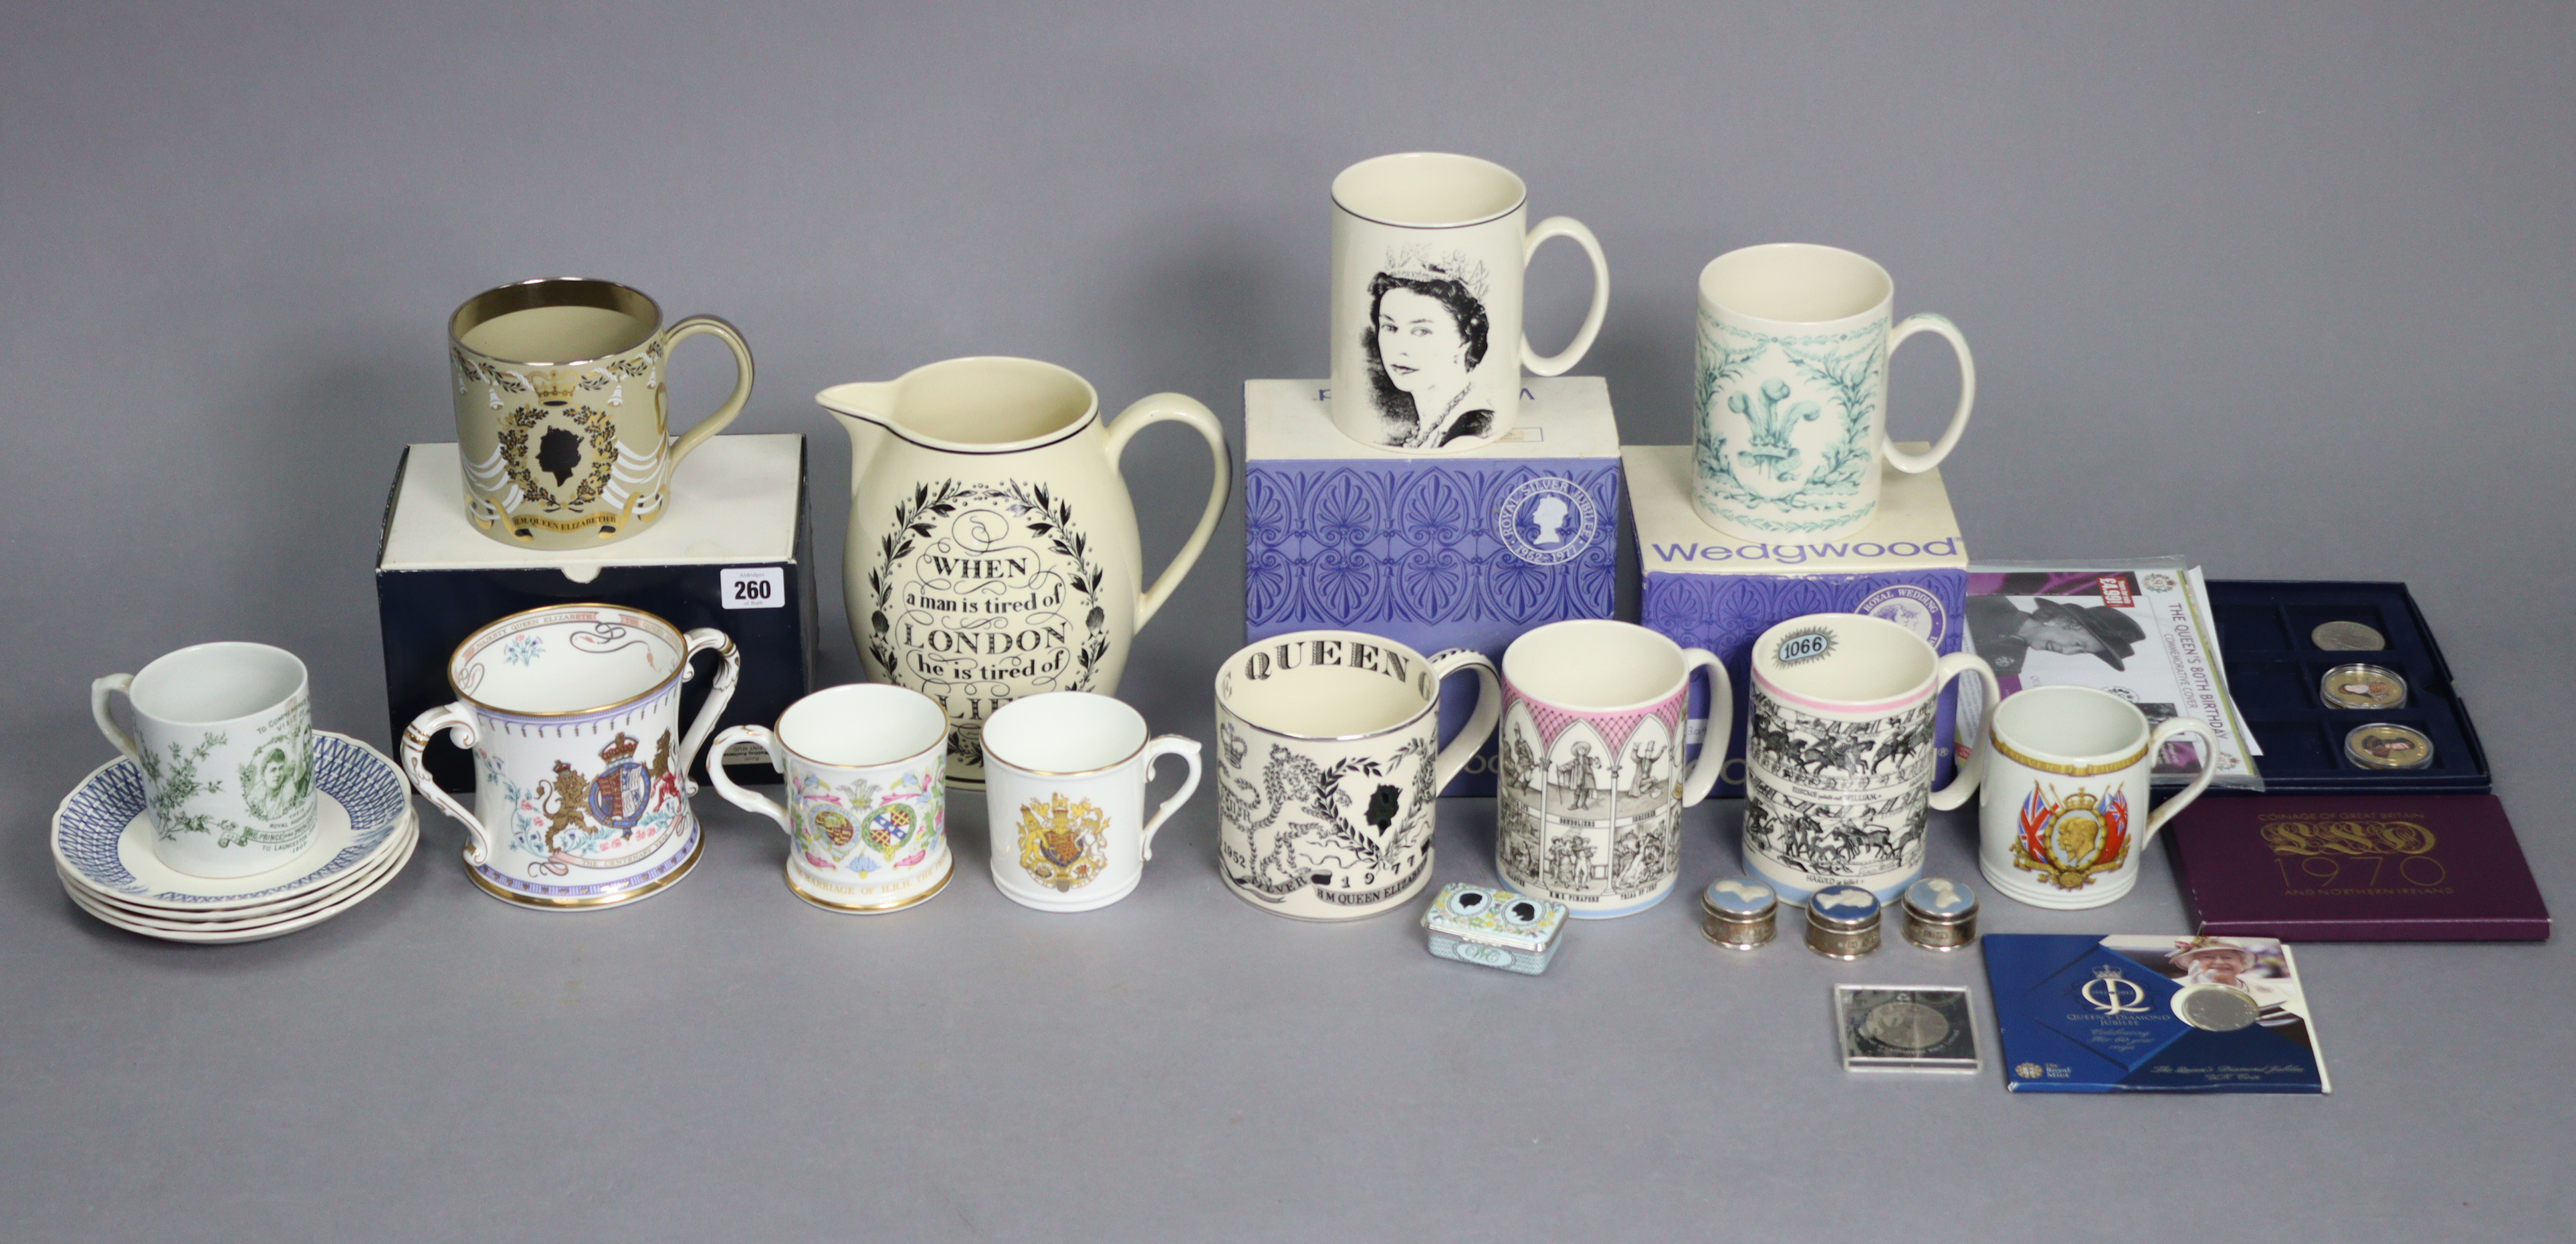 A Wedgwood of Etruria jug “The London Jug”, 7¾” high; together with various items of royal